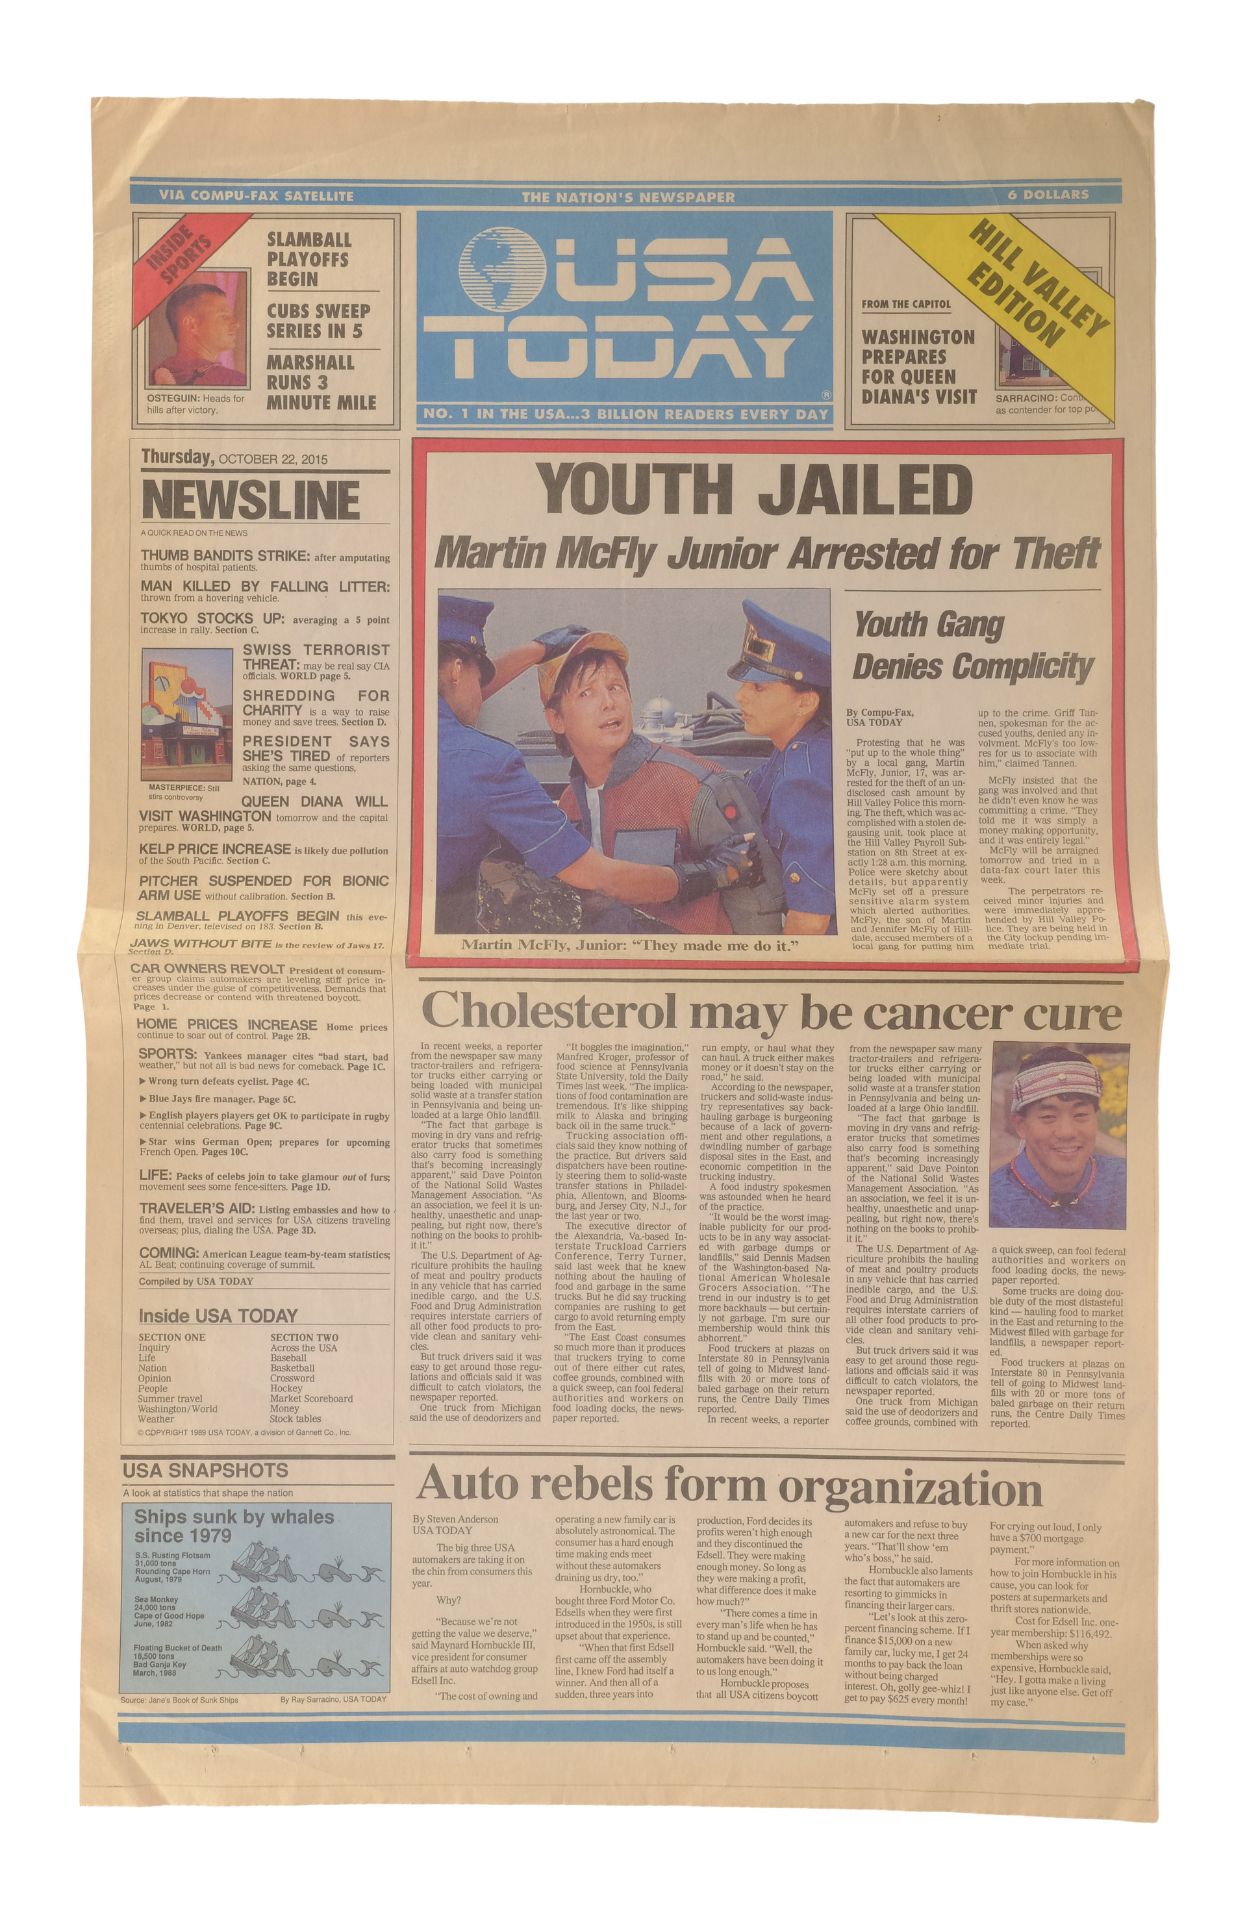 BACK TO THE FUTURE PART II (1989) - "Youth Jailed" USA Today Newspaper Cover - Image 2 of 4